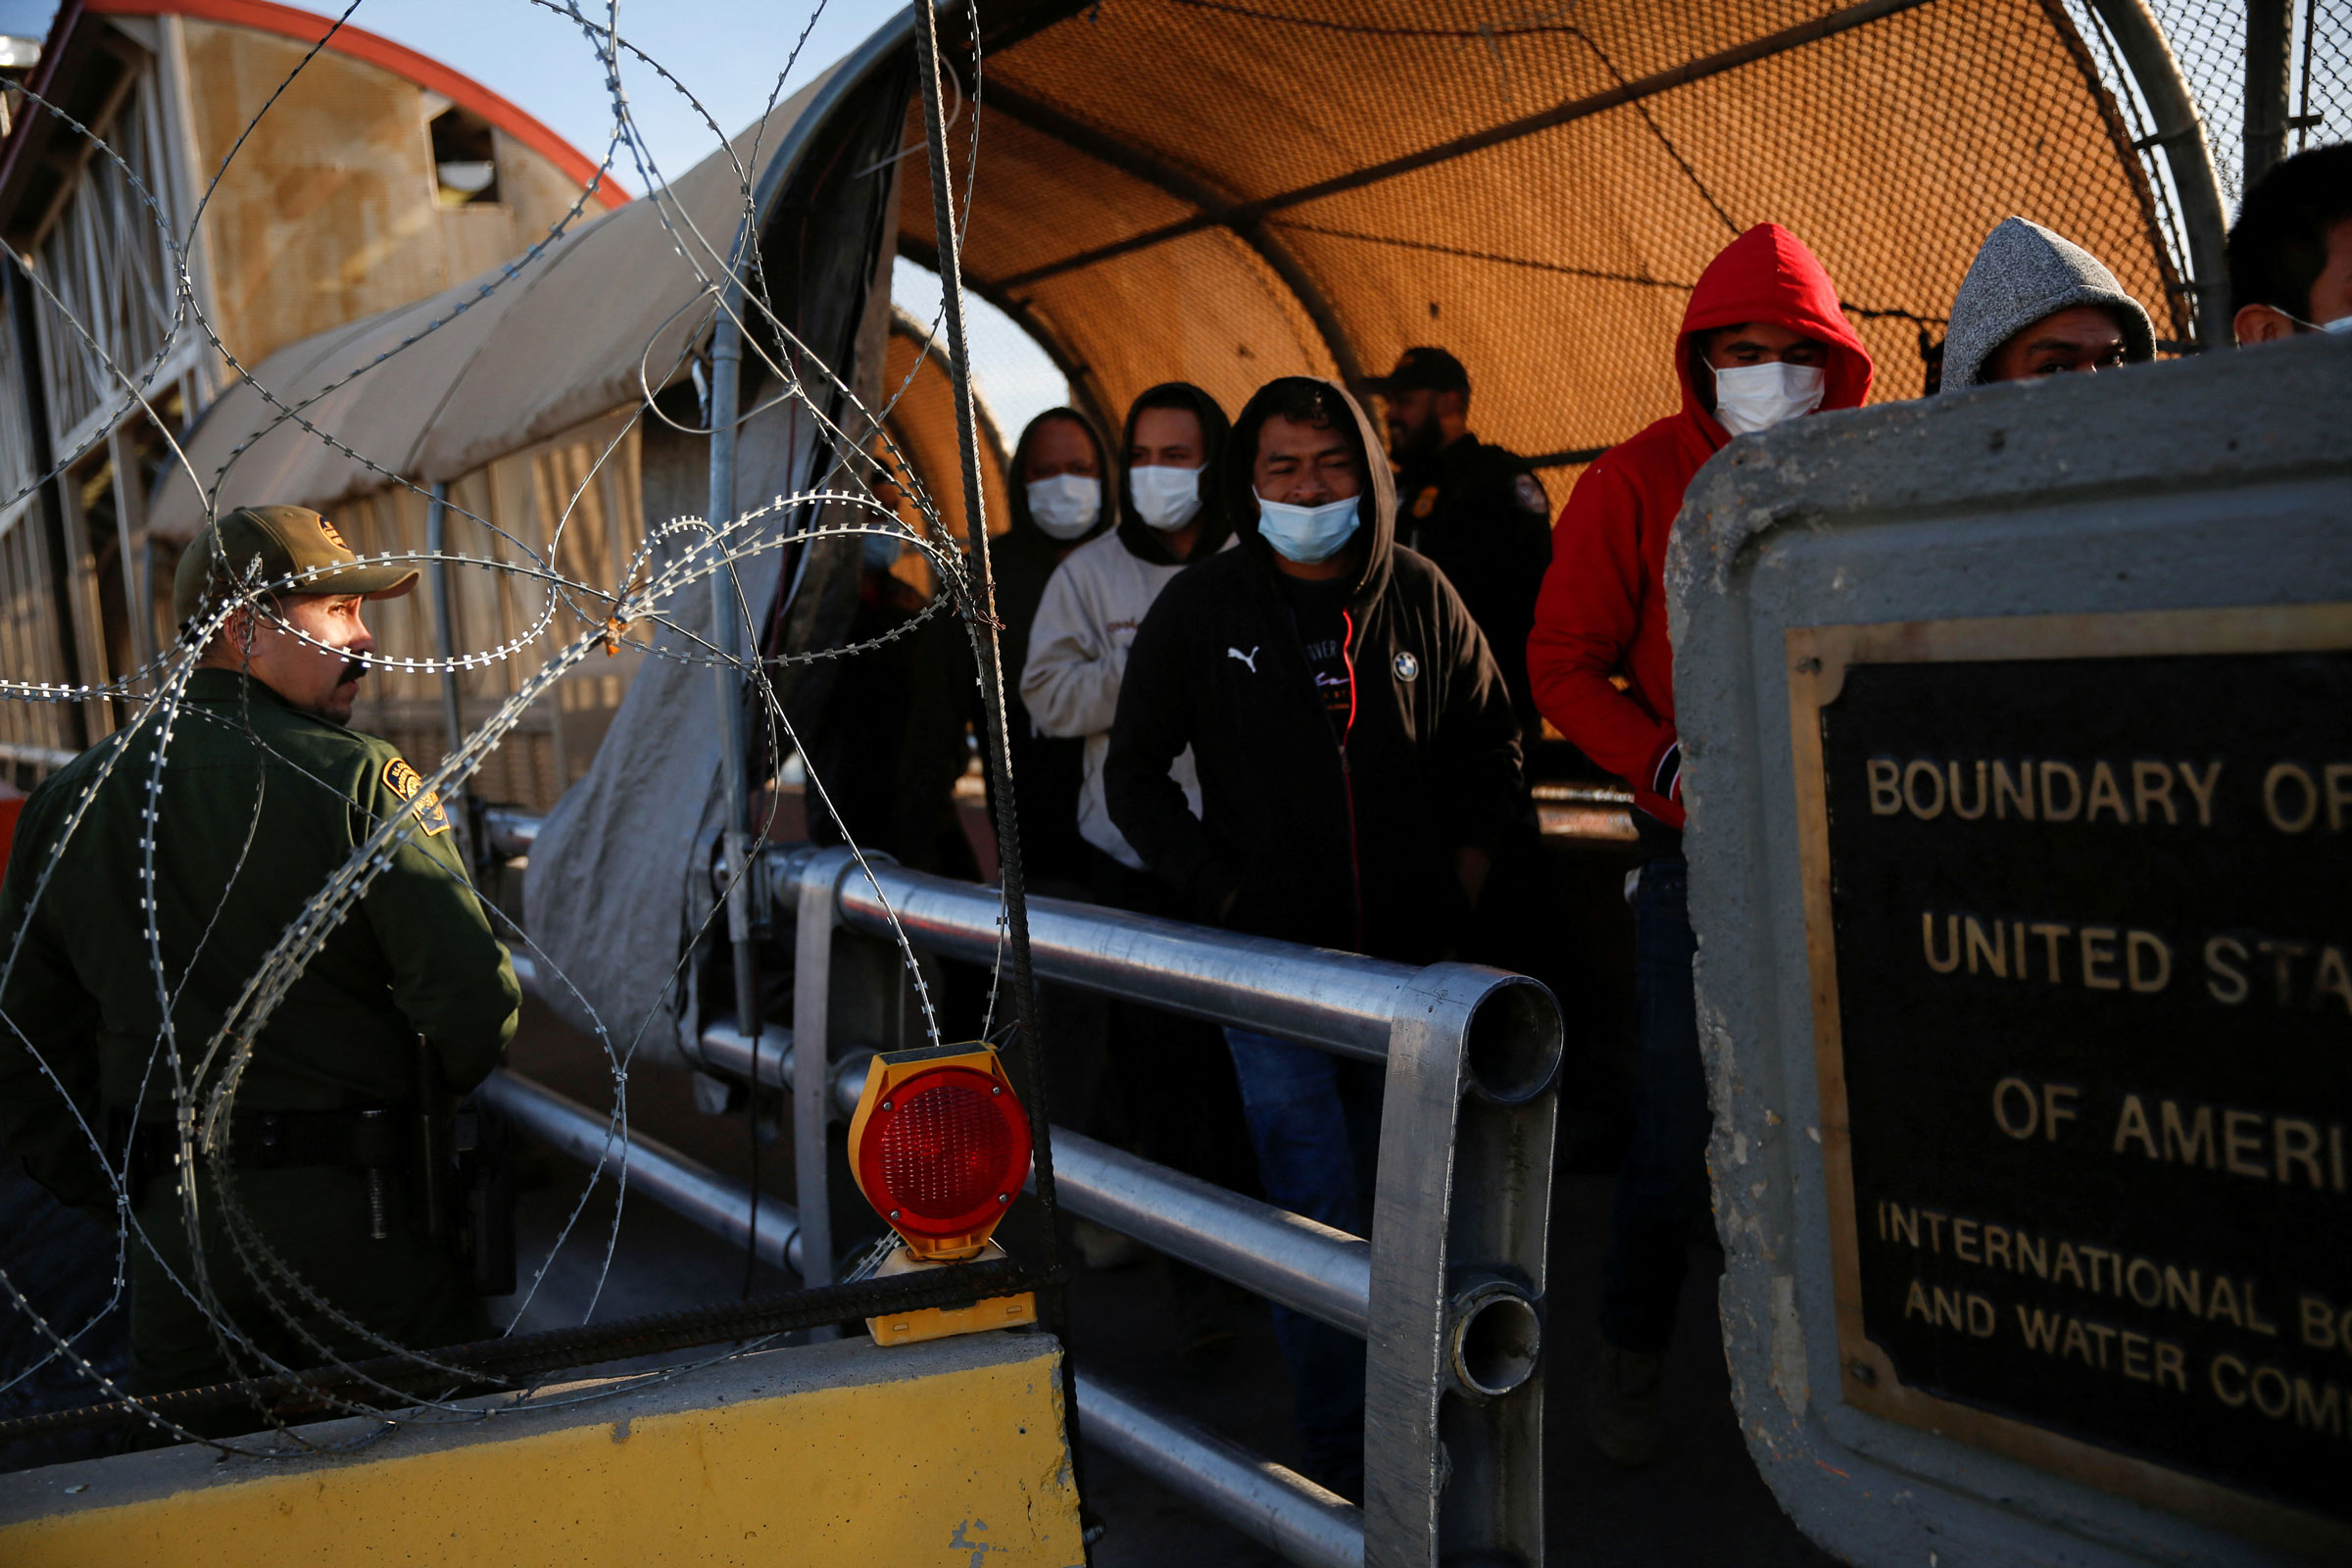 Migrants expelled from the U.S. and sent back to Mexico under Title 42, walk towards Mexico at the Paso del Norte International border bridge, as a U.S. Border Patrol agent watches them, in this picture taken from Ciudad Juarez, Mexico April 1, 2022. (Jose Luis Gonzalez—Reuters)